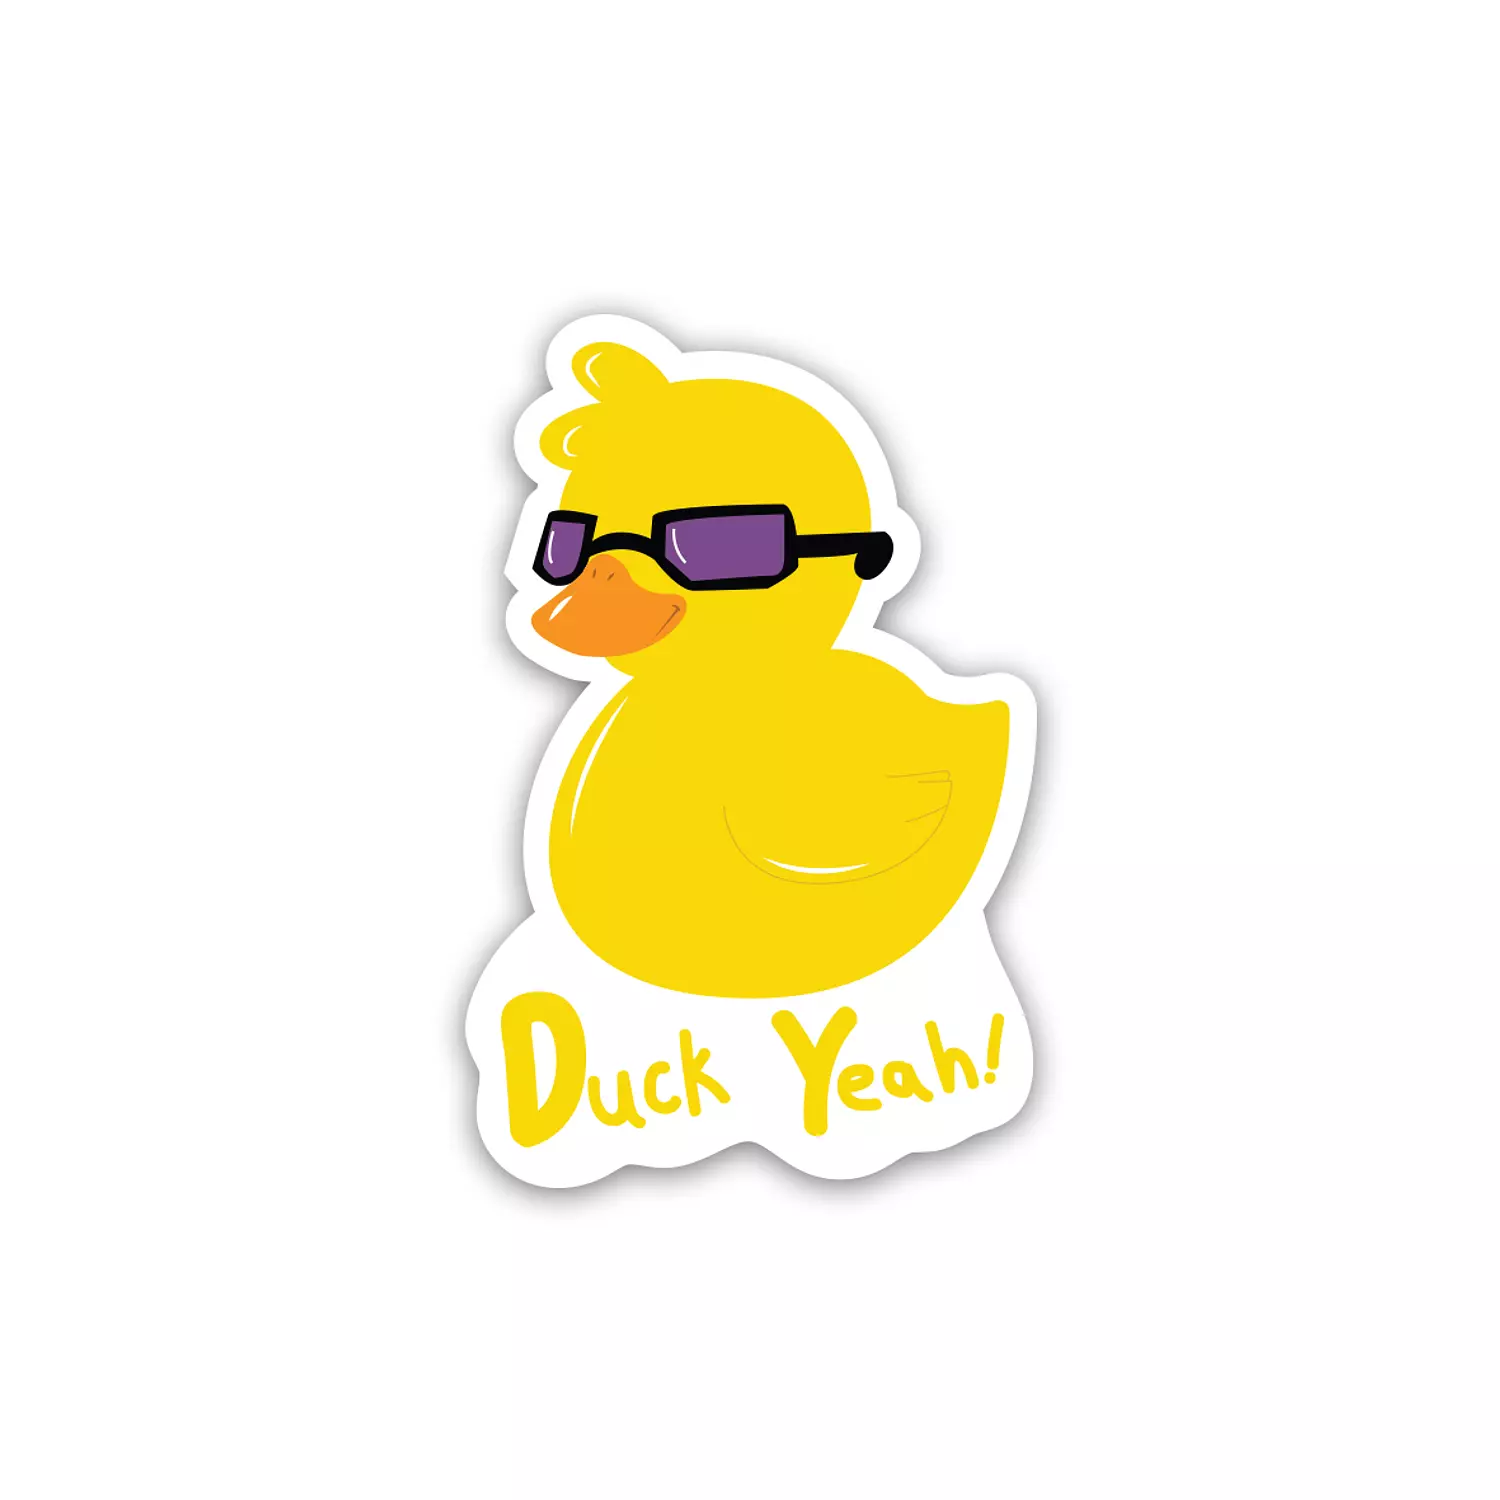 Duck you 😎 hover image